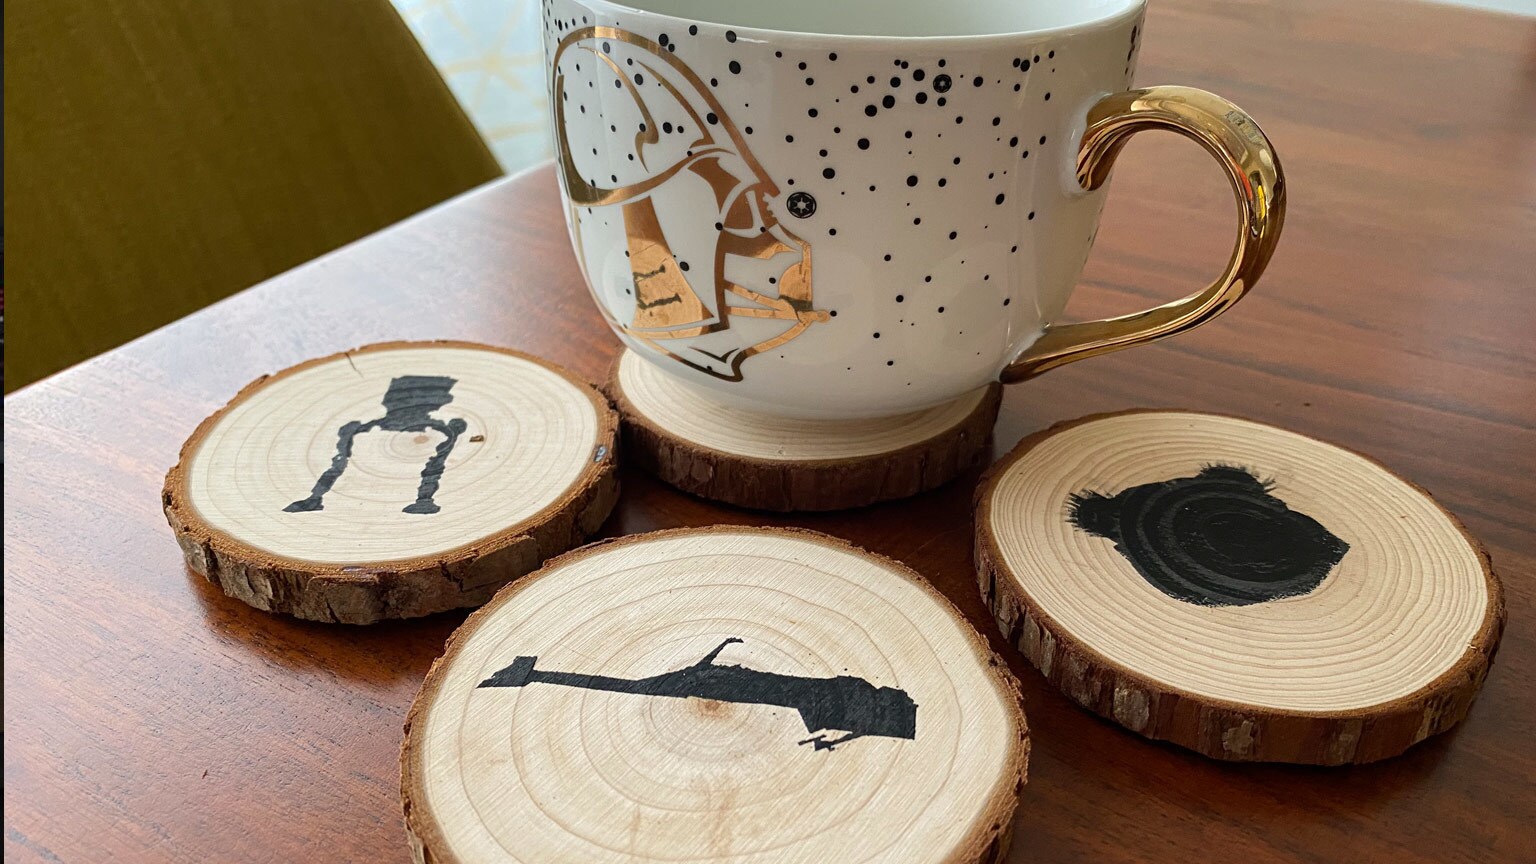 Bring Endor Indoors with These DIY Wood Coasters